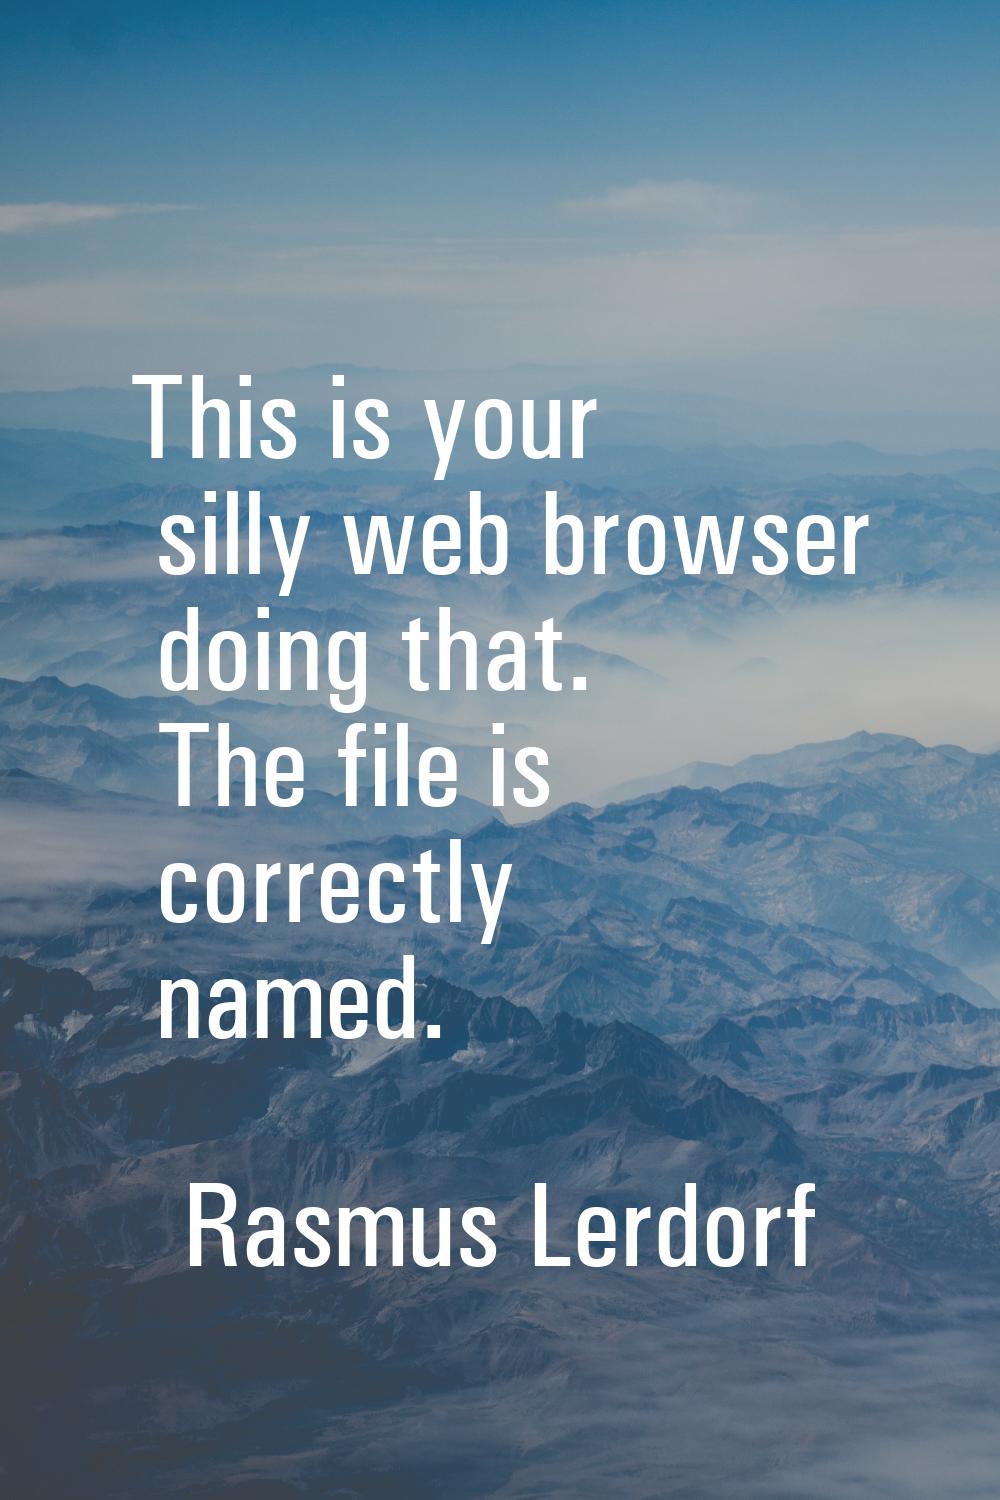 This is your silly web browser doing that. The file is correctly named.